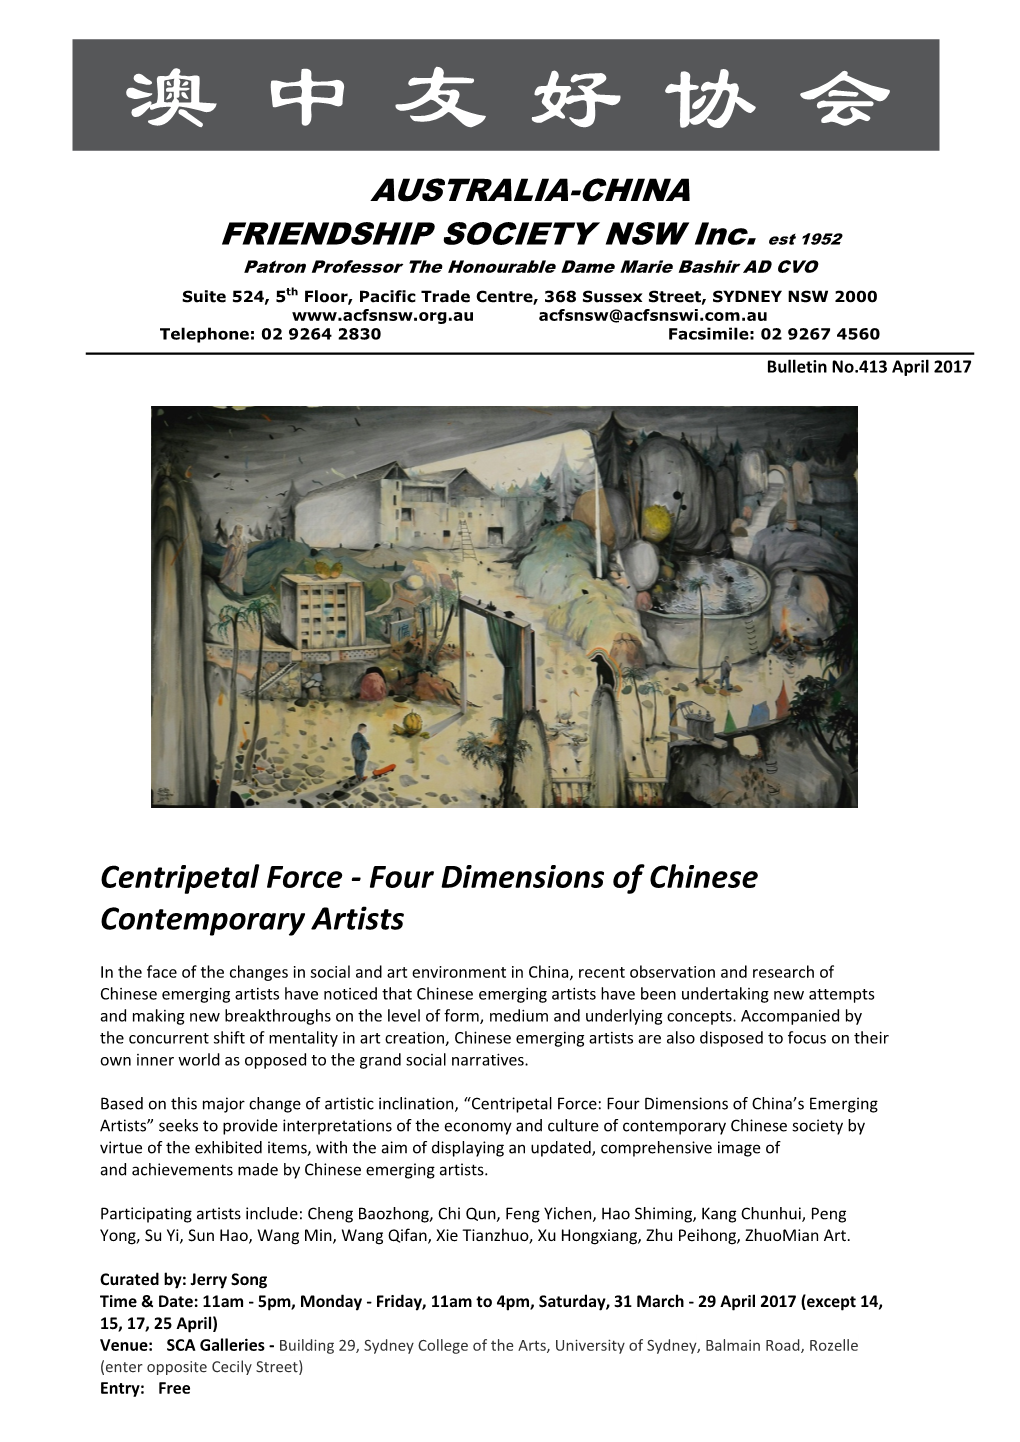 Four Dimensions of Chinese Contemporary Artists